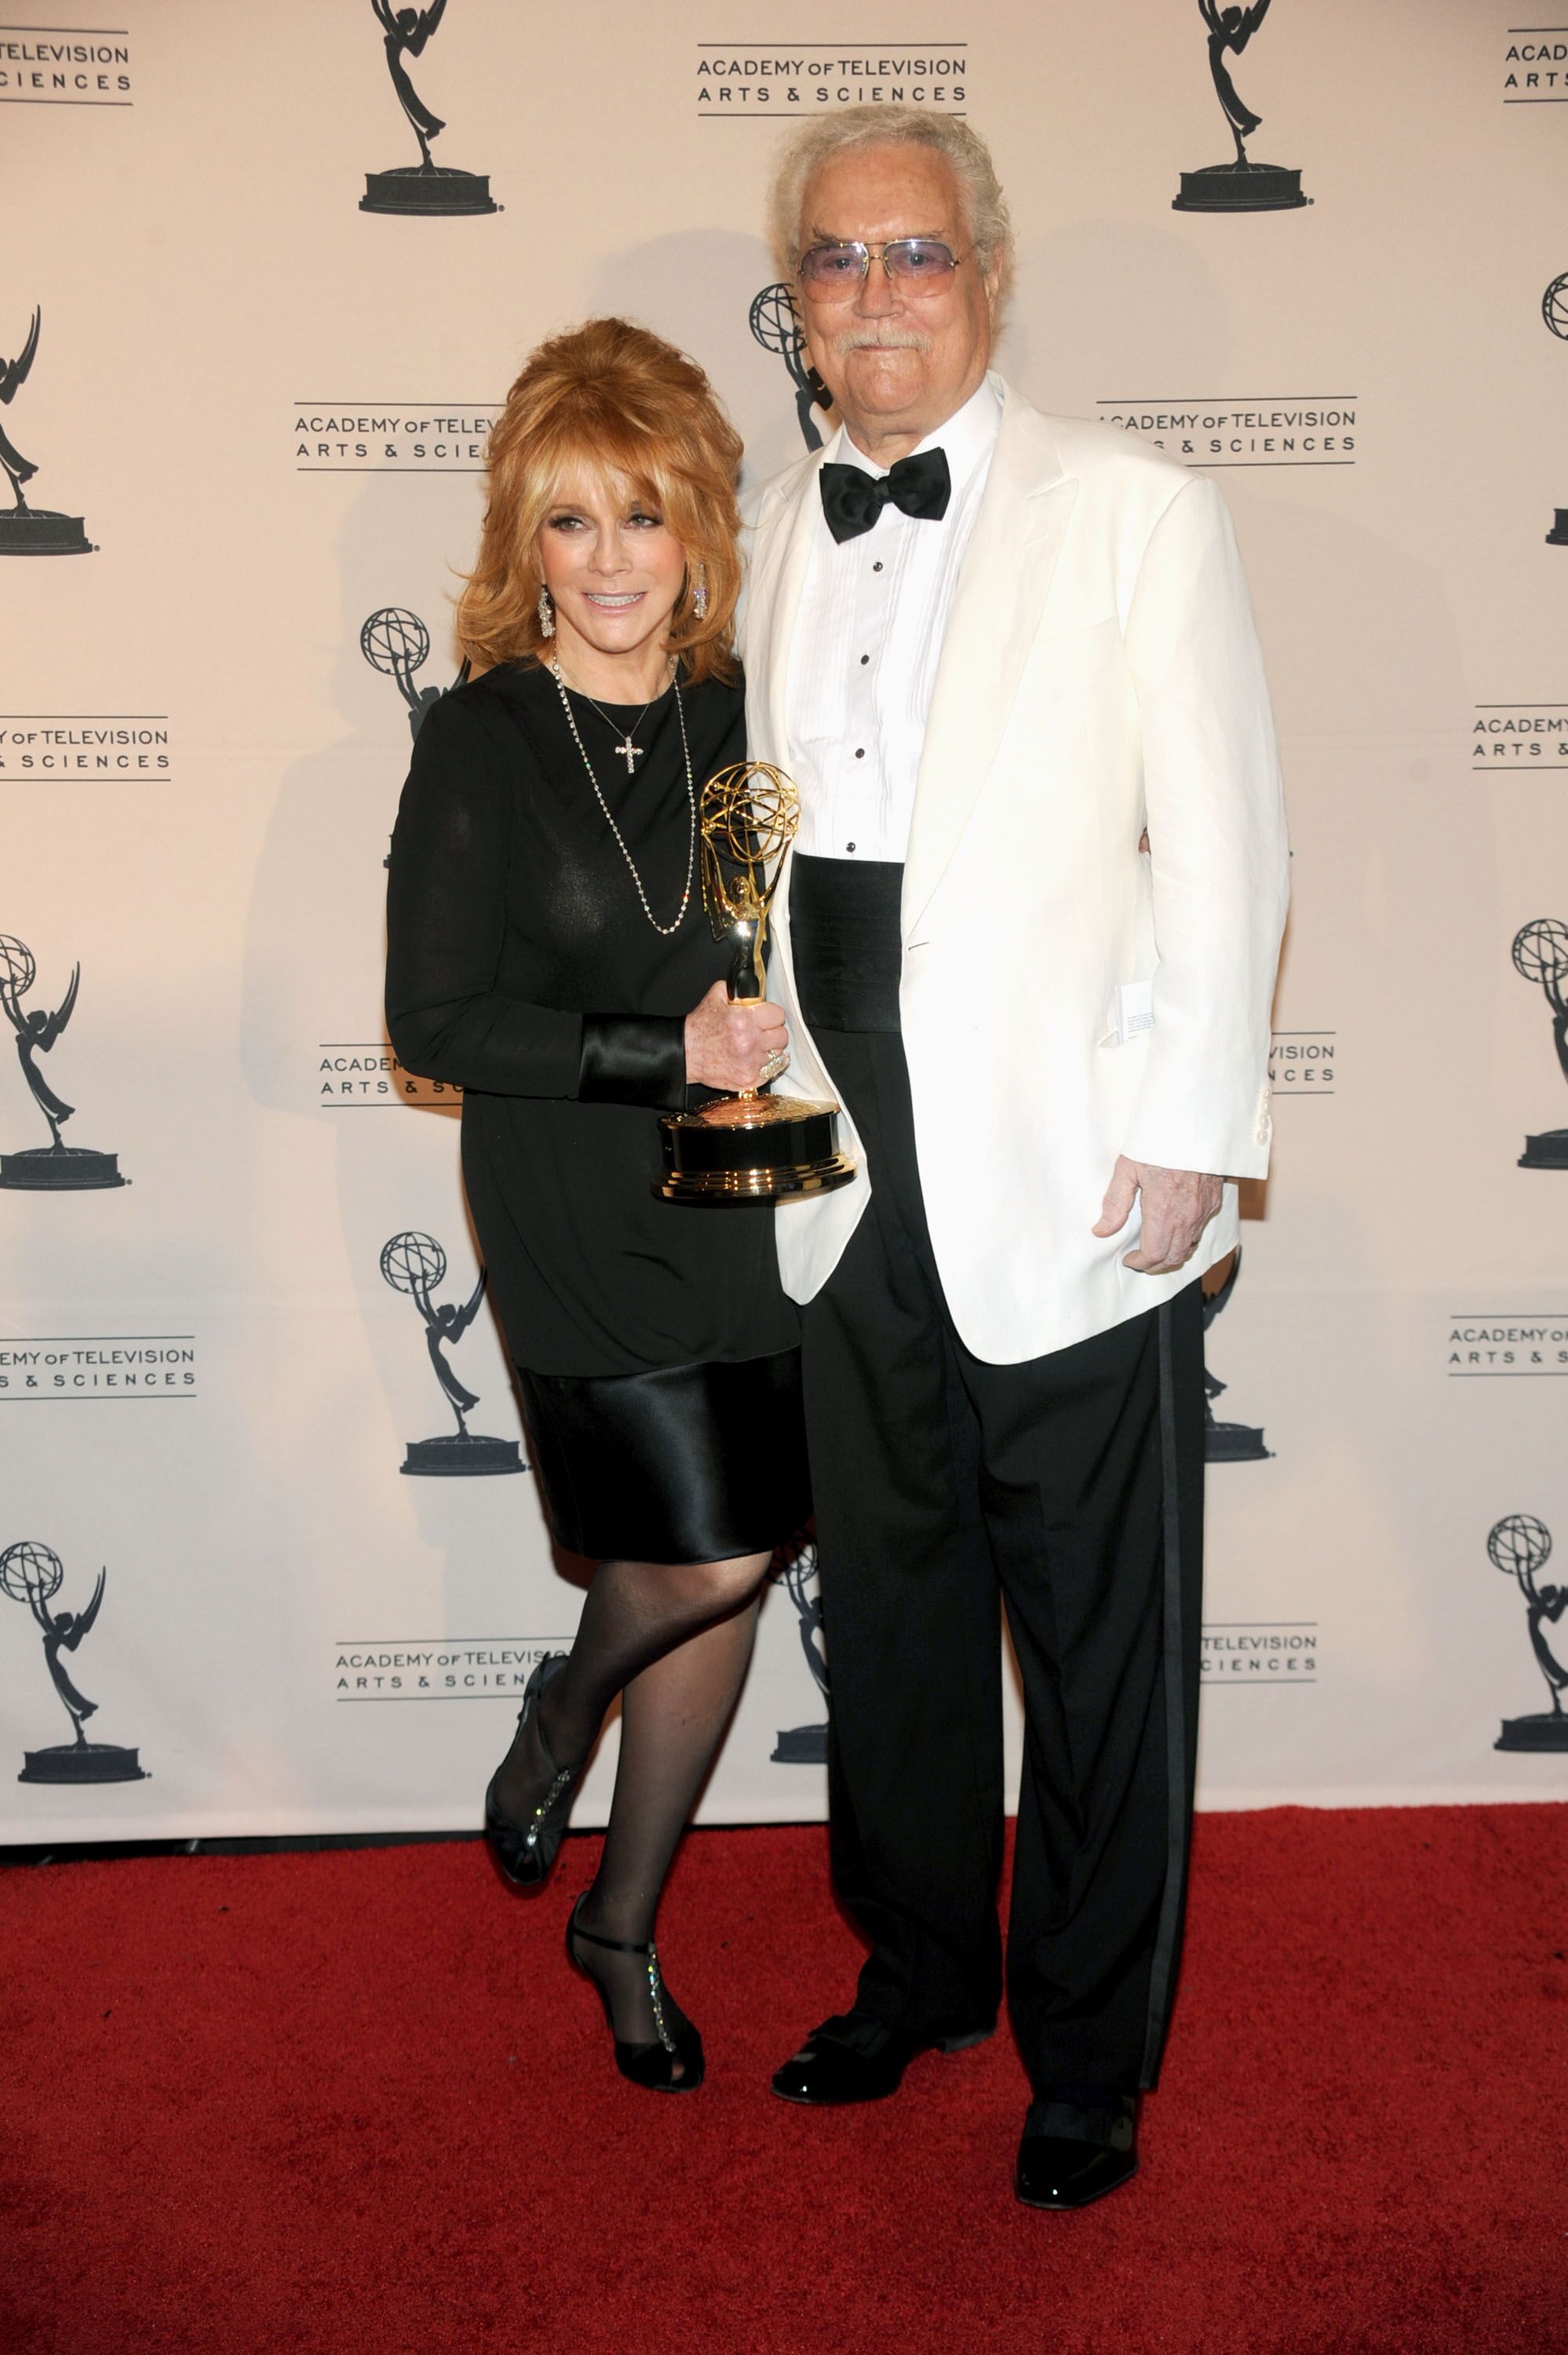 Ann-Margret and Roger Smith at the Primetime Creative Arts Emmy Awards. | Source: Getty Images